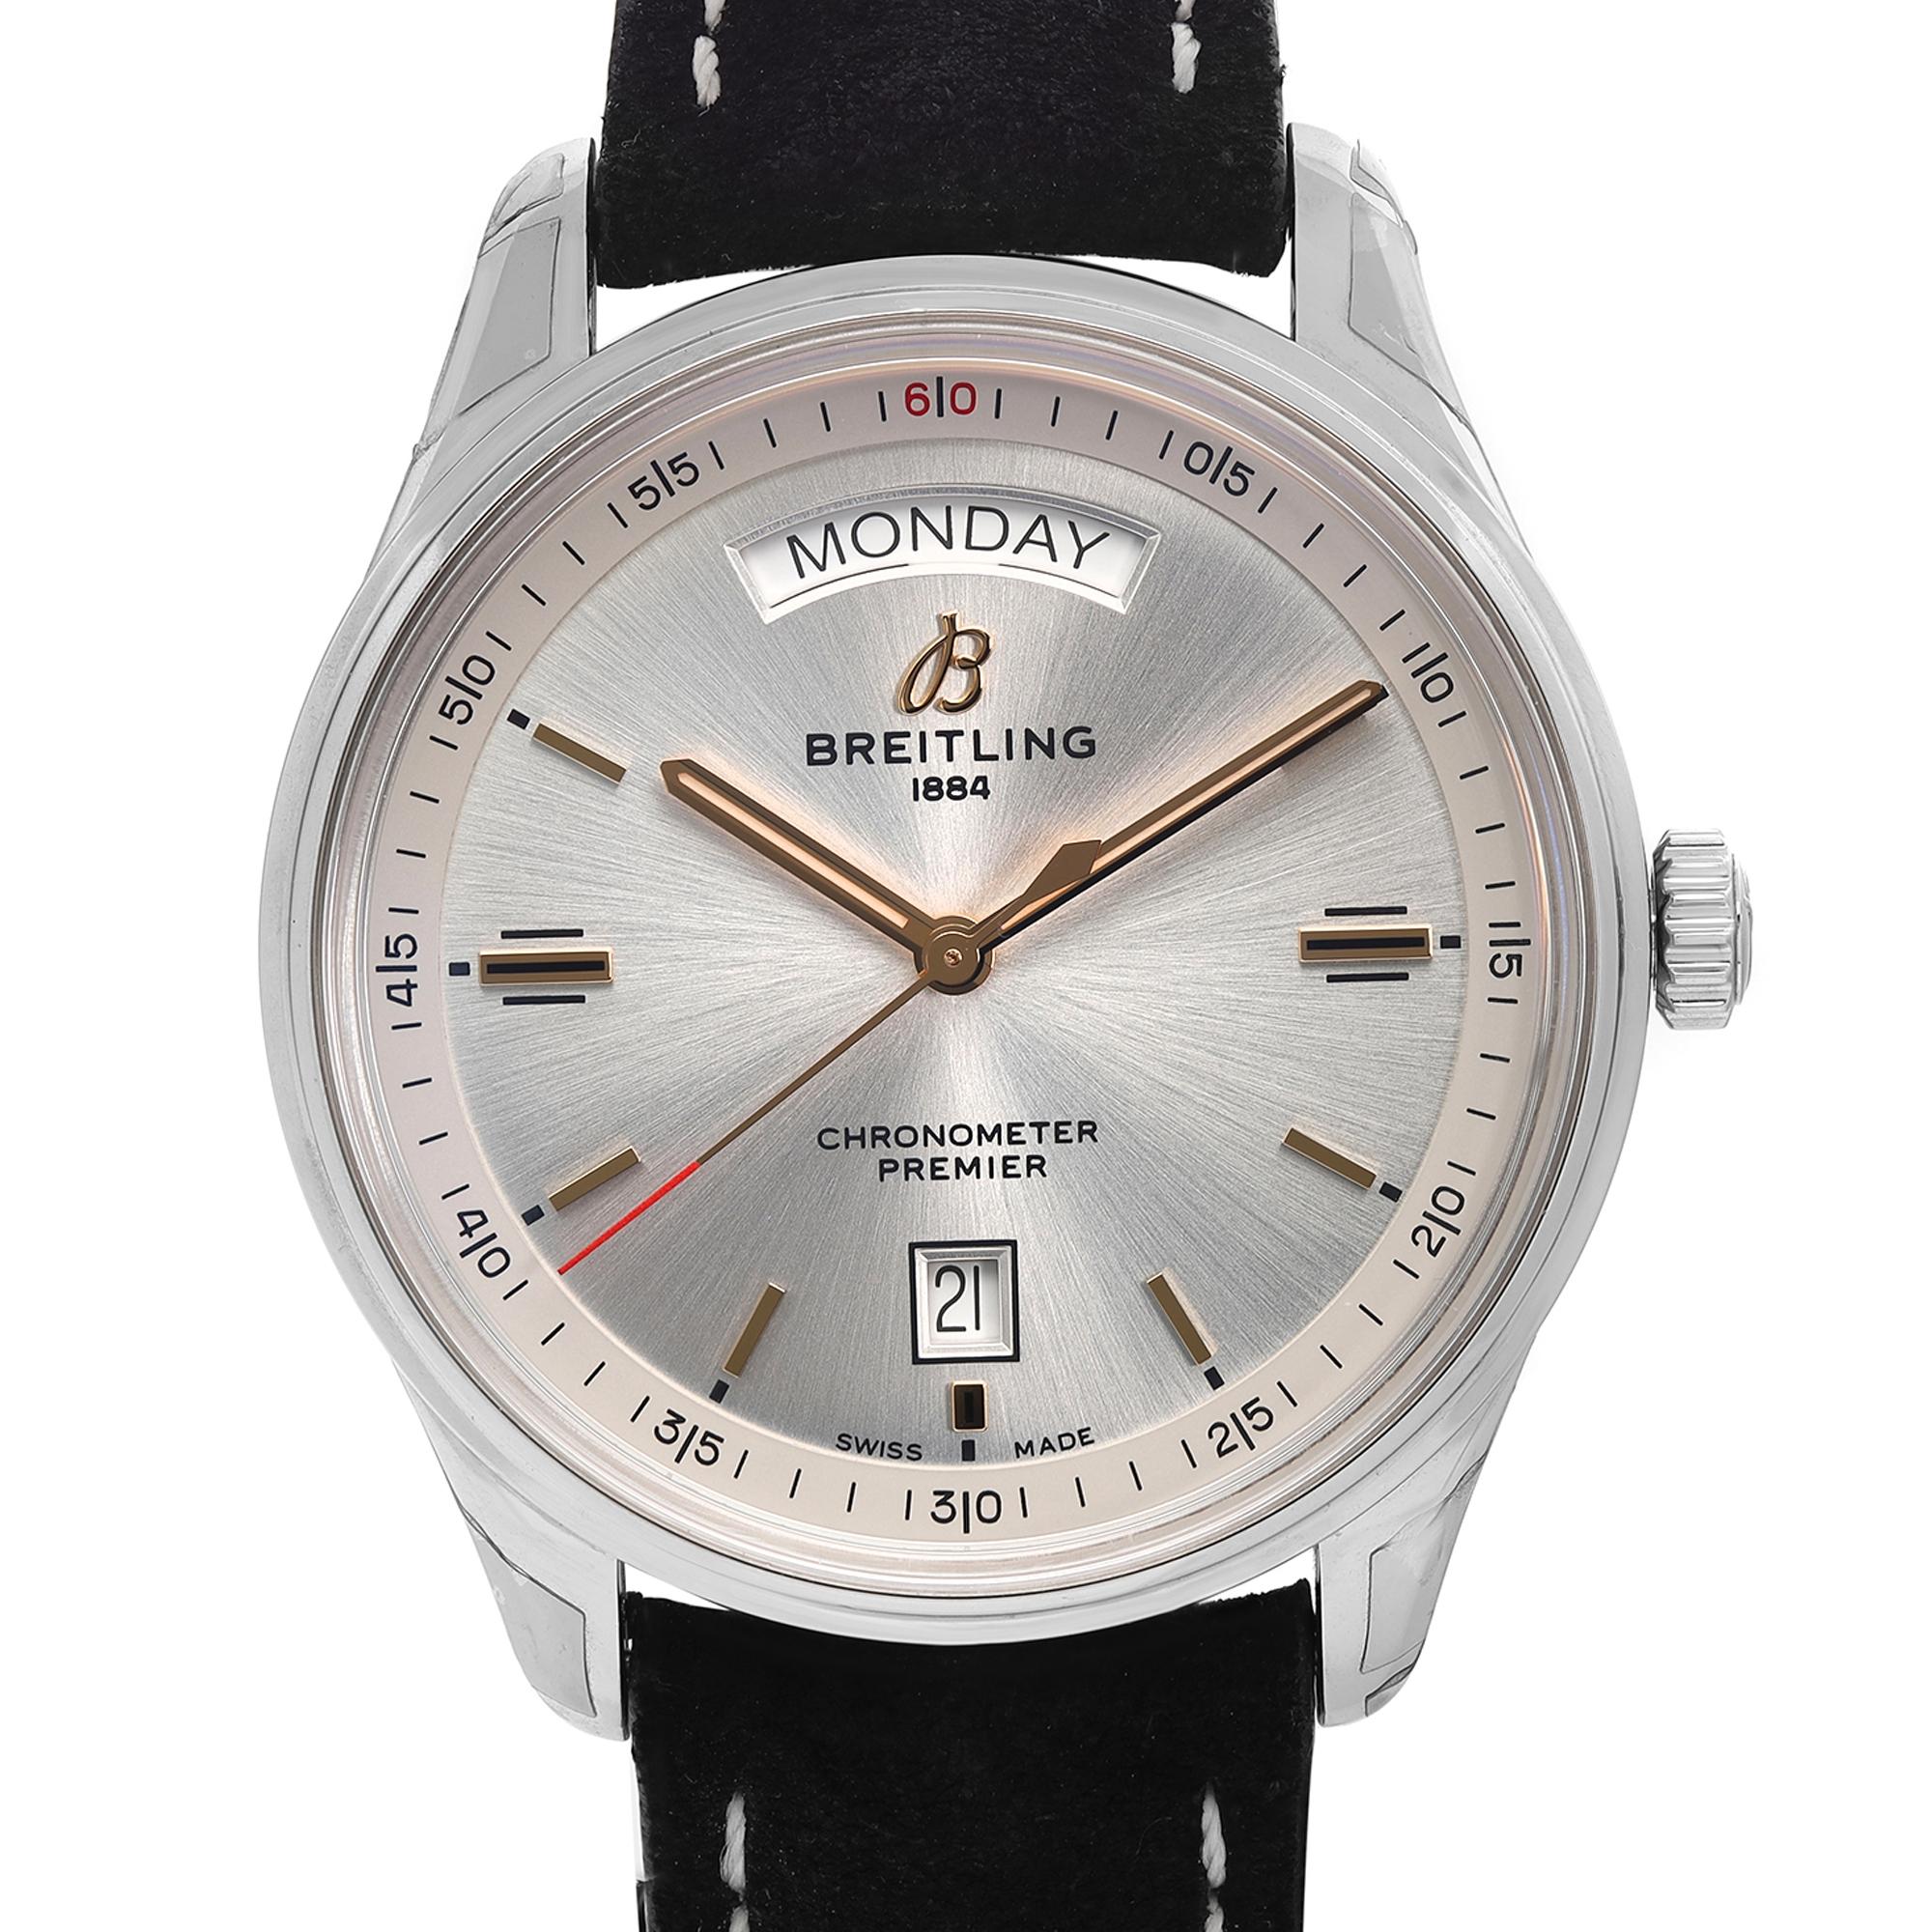 Store Display Model. Comes with an original Box. But papers and manuals are Not included.  

Brand: Breitling
Model Number: A45340211G1X2
Department: Men
Country/Region of Manufacture: Switzerland
Style: Luxury
Model Name: Breitling Premier
Vintage: